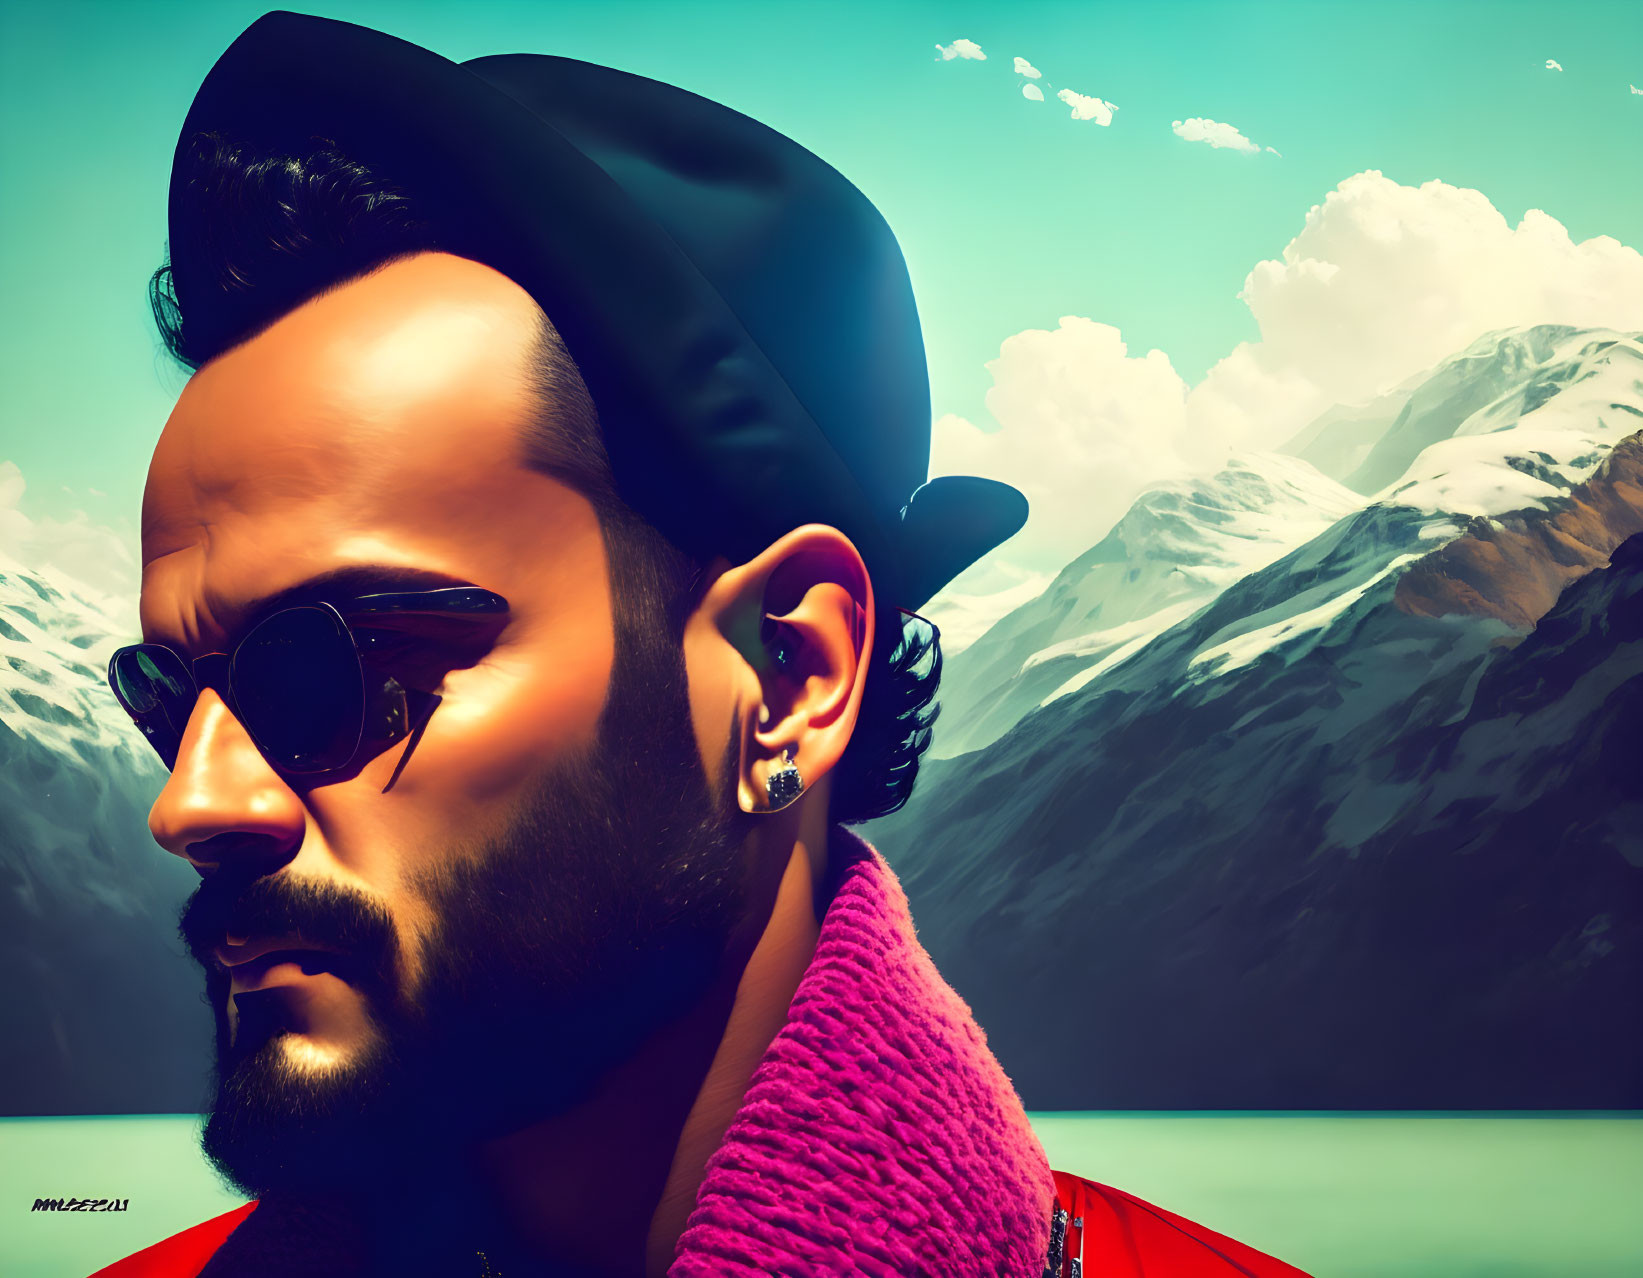 Digital portrait of bearded man in sunglasses and beret with mountain and lake backdrop